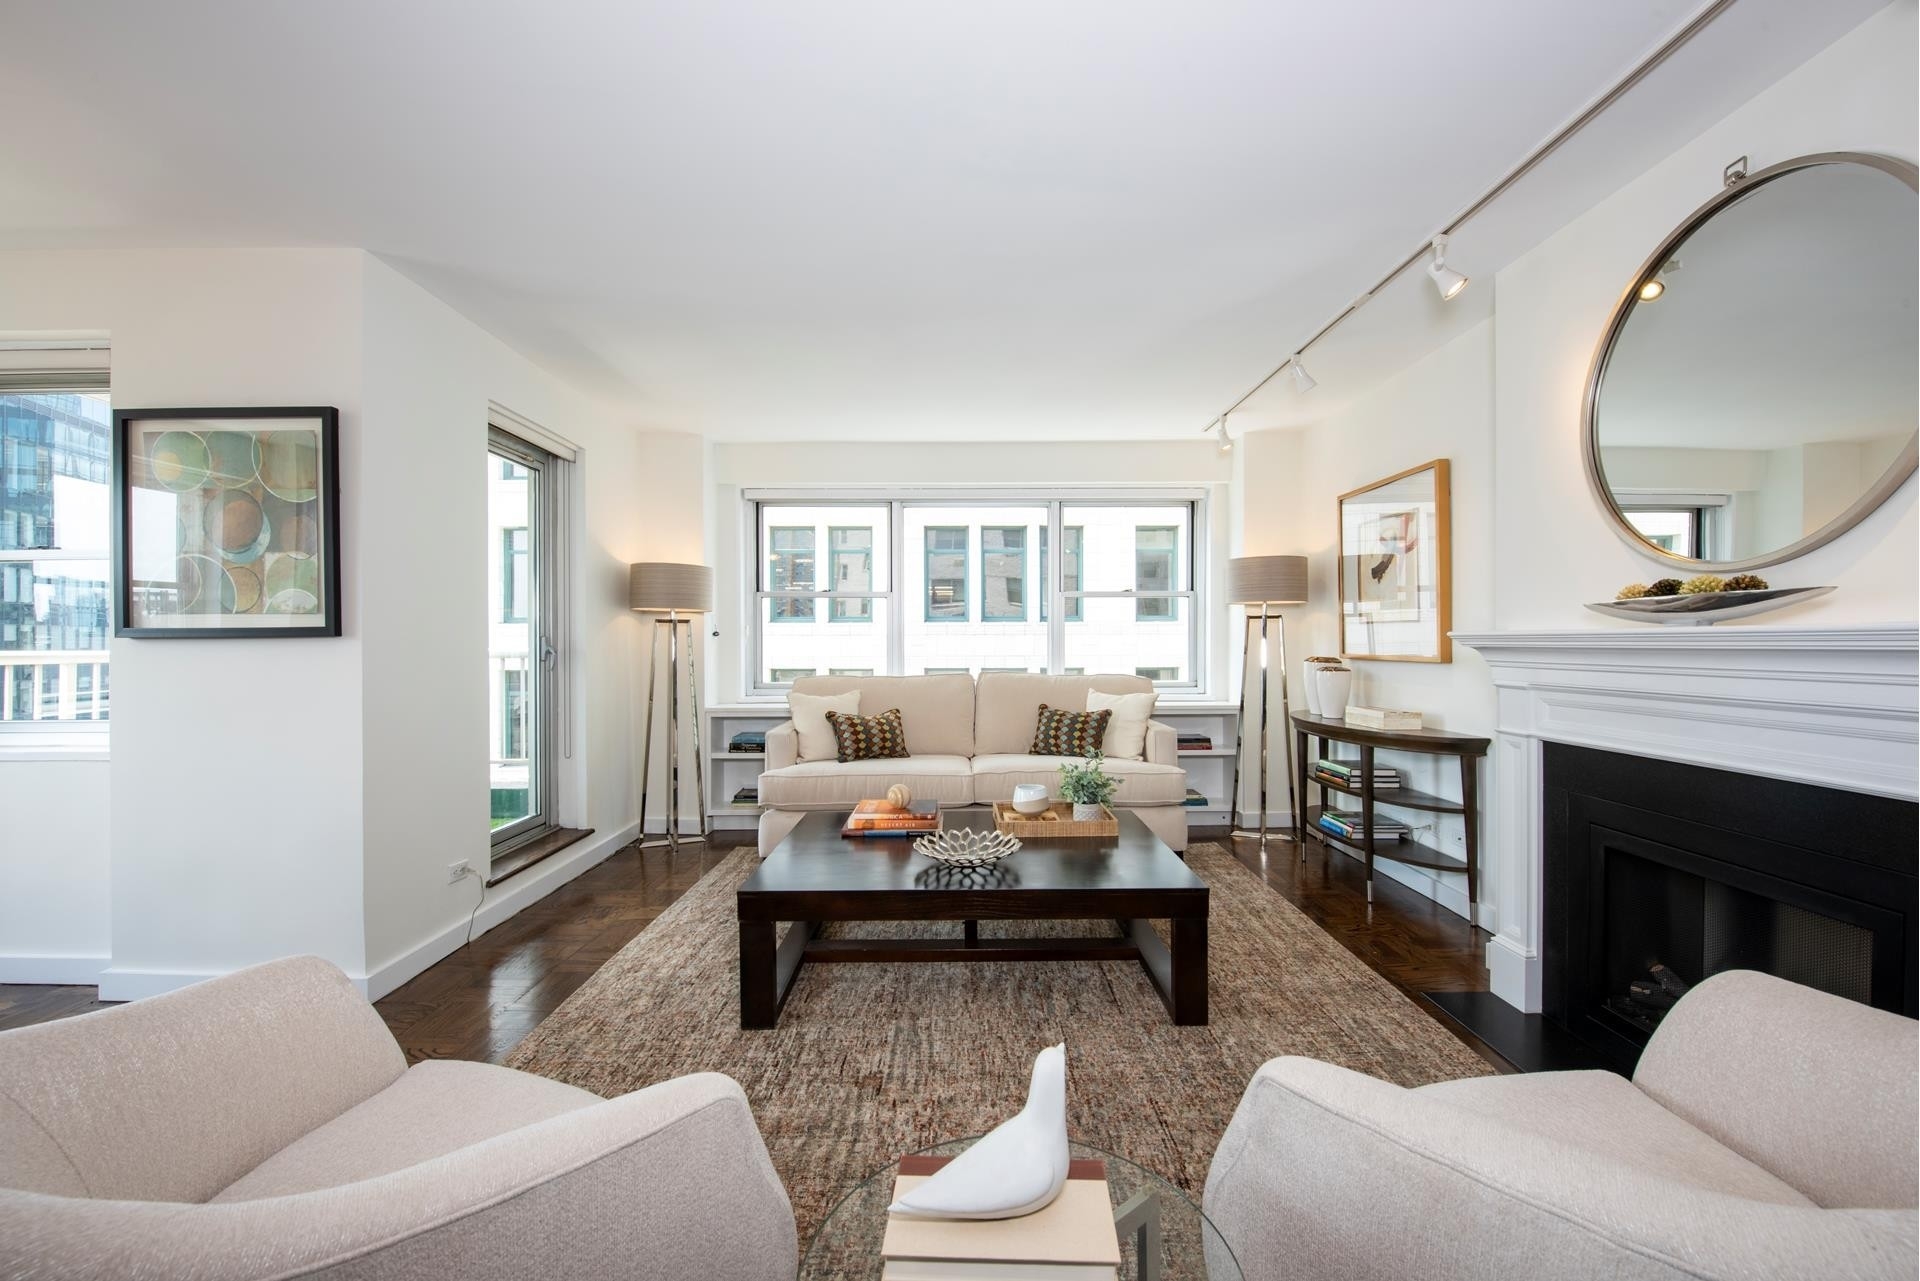 Co-op Properties for Sale at Stewart House, 70 E 10TH ST, 16B Greenwich Village, New York, NY 10003